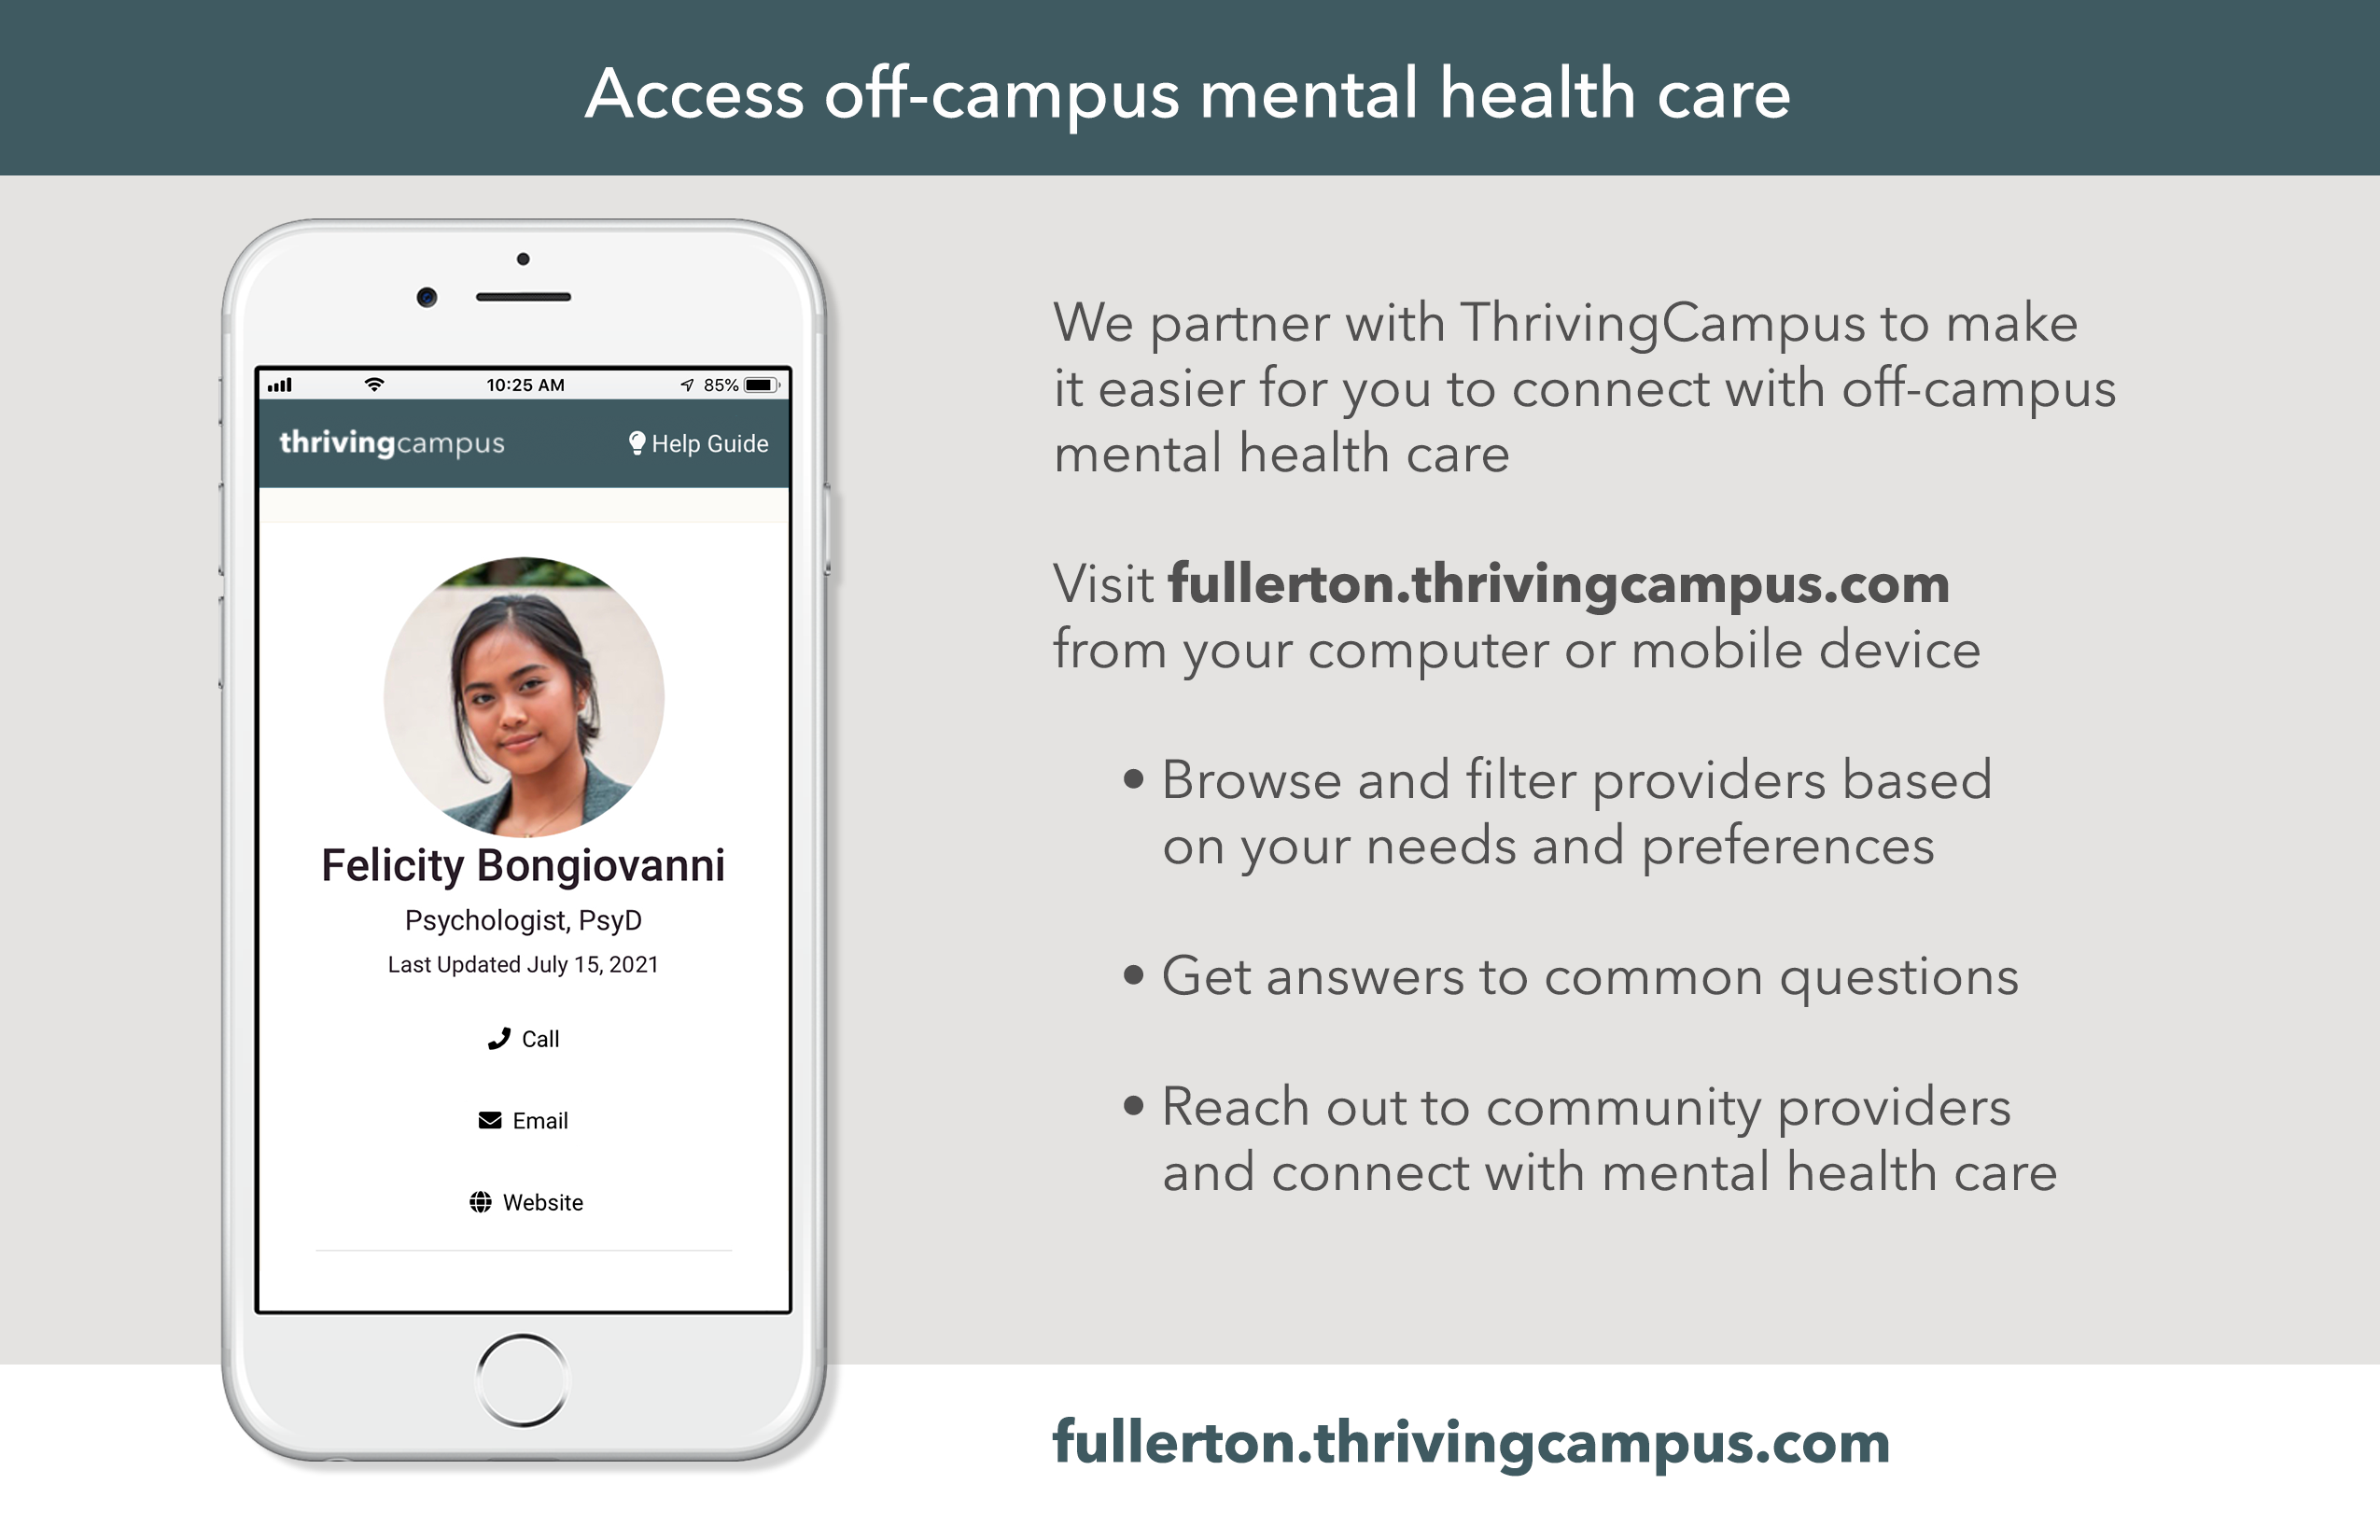 Visit fullerton.thrivingcampus.com to connect with off-campus mental health care